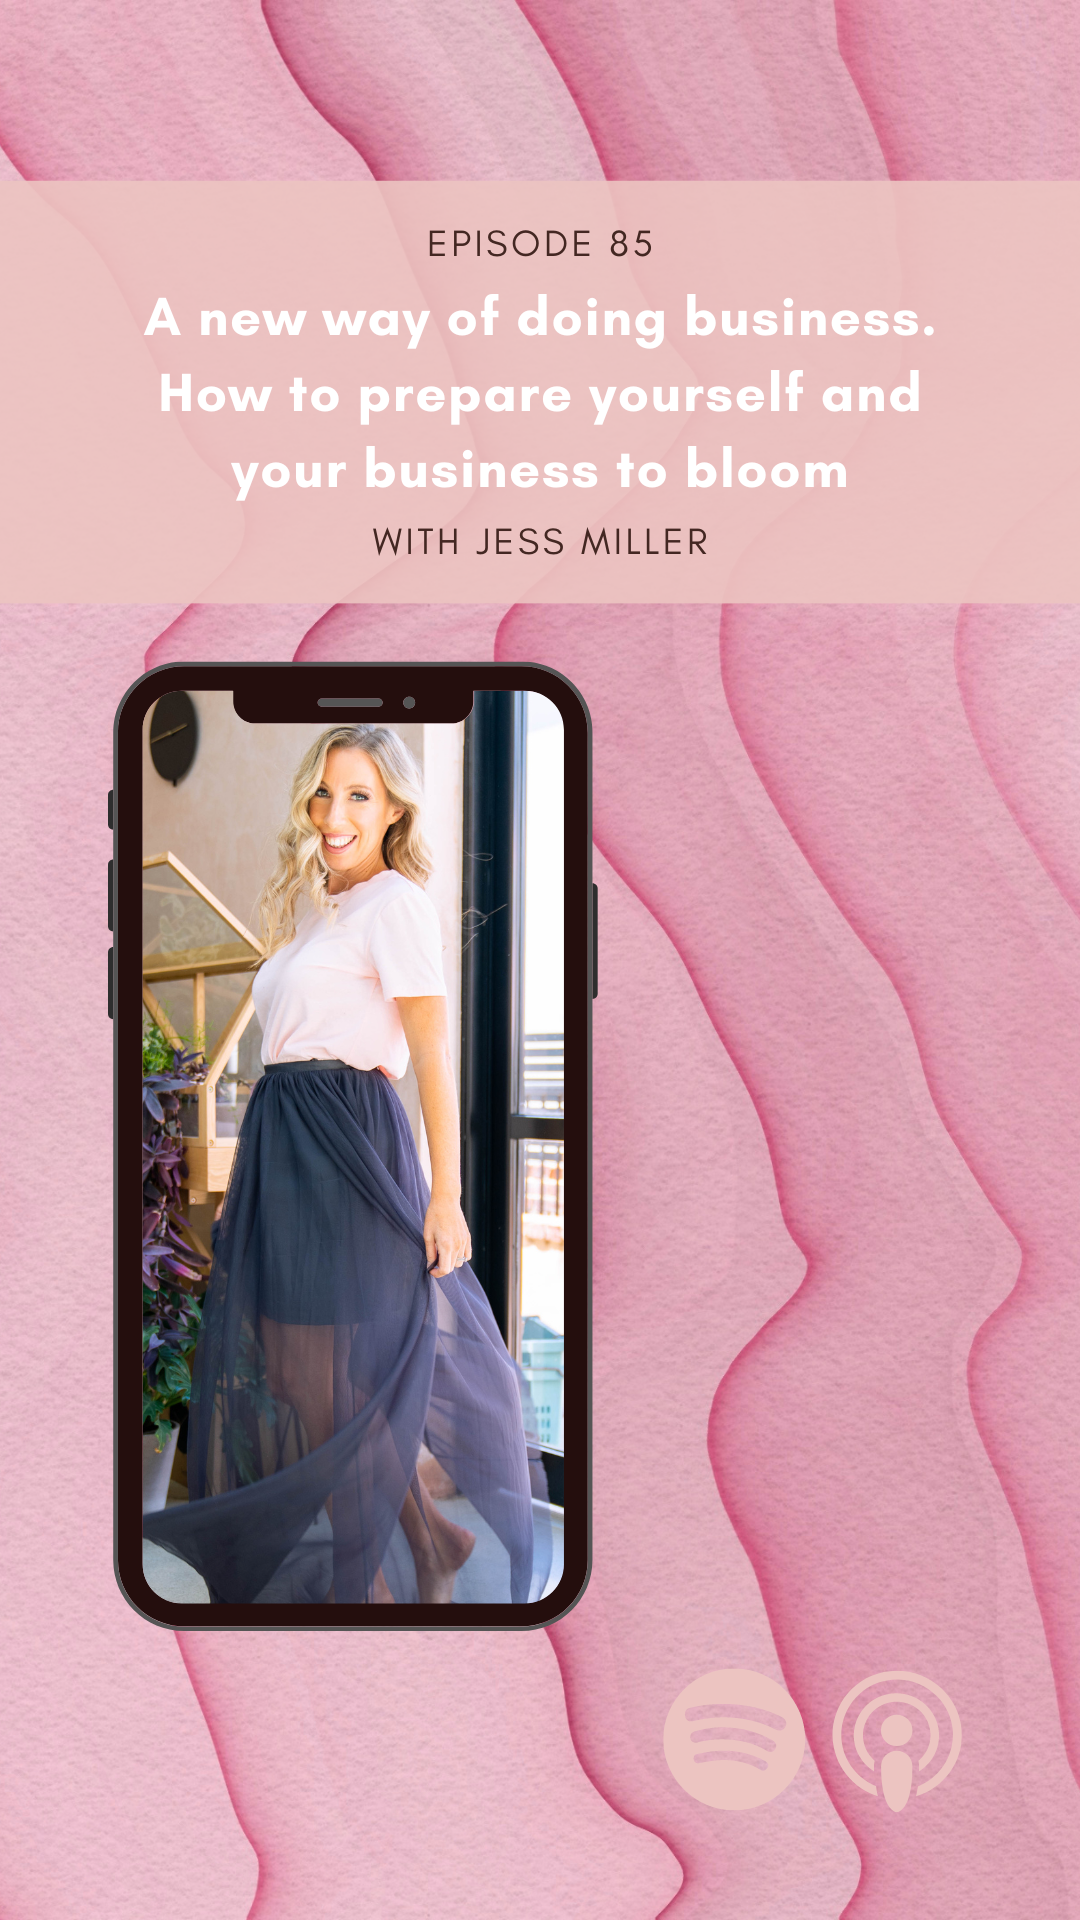 A new way of doing business. How to prepare yourself and your business to bloom with Jess Miller